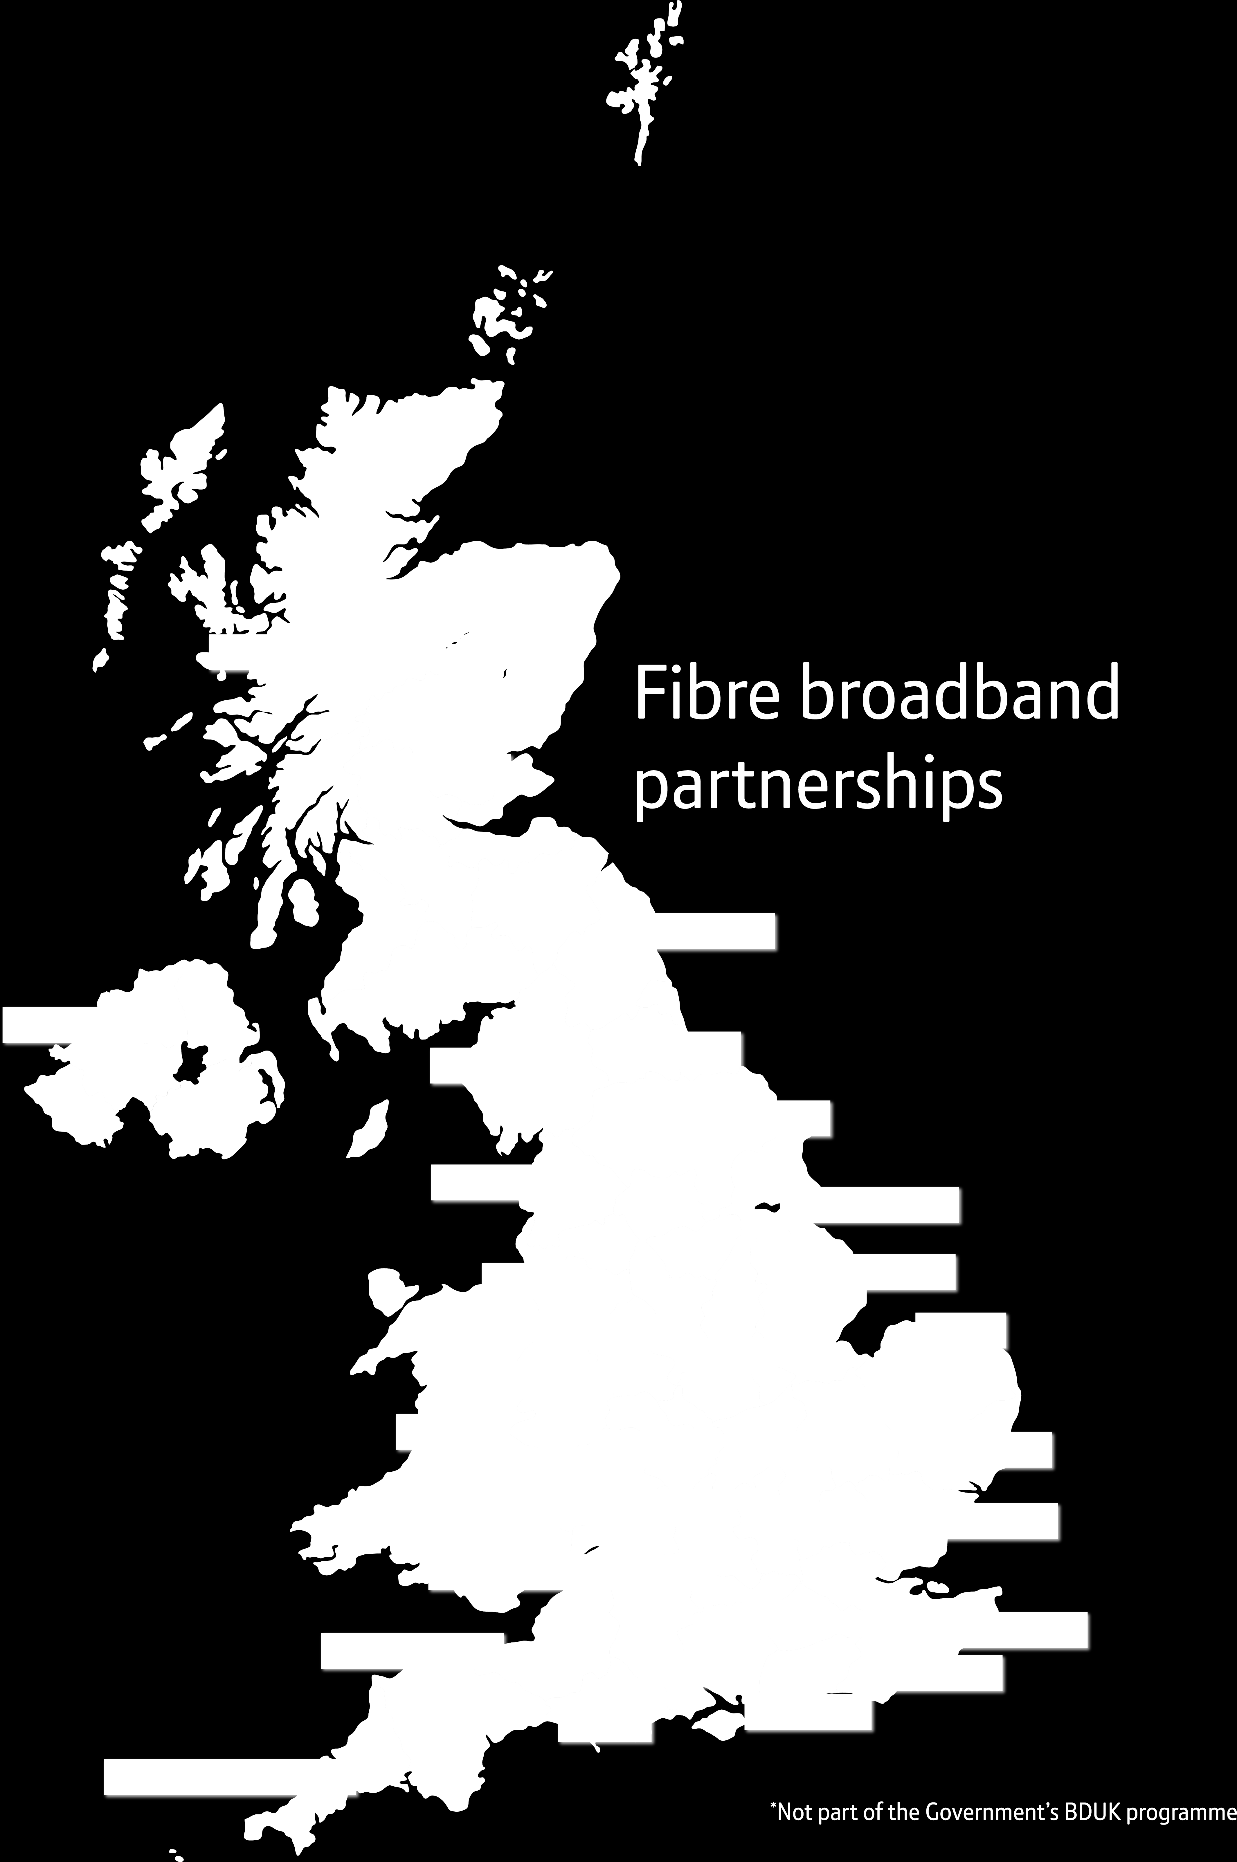 BDUK bids won @ August 2013 This map shows where Openreach have been successful in bidding to supply Superfast Fibre in BDUK locations (shown in